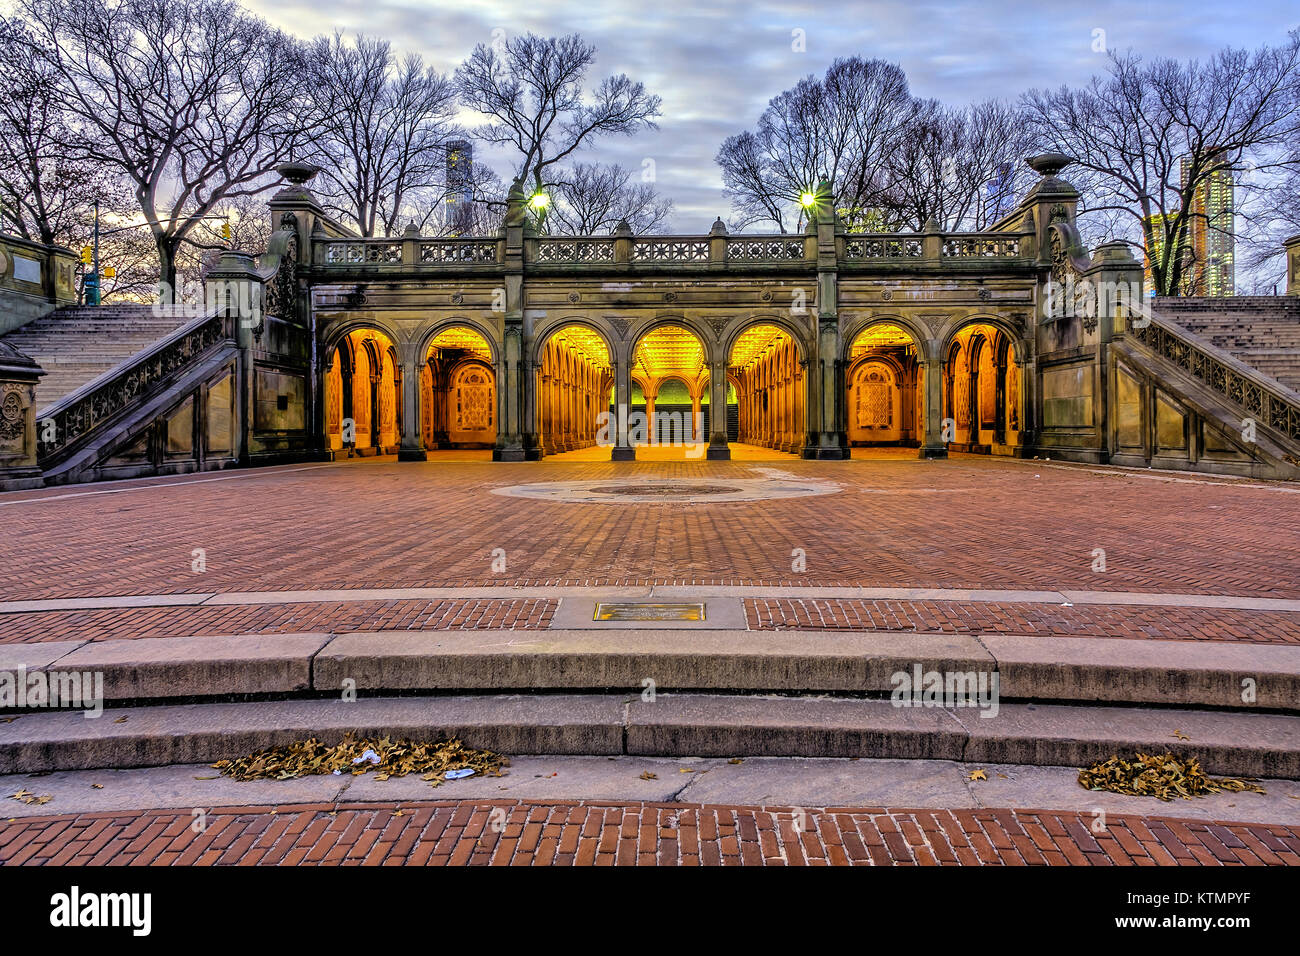 Bethesda Terrace – Just Looking Around – with ThomBradley